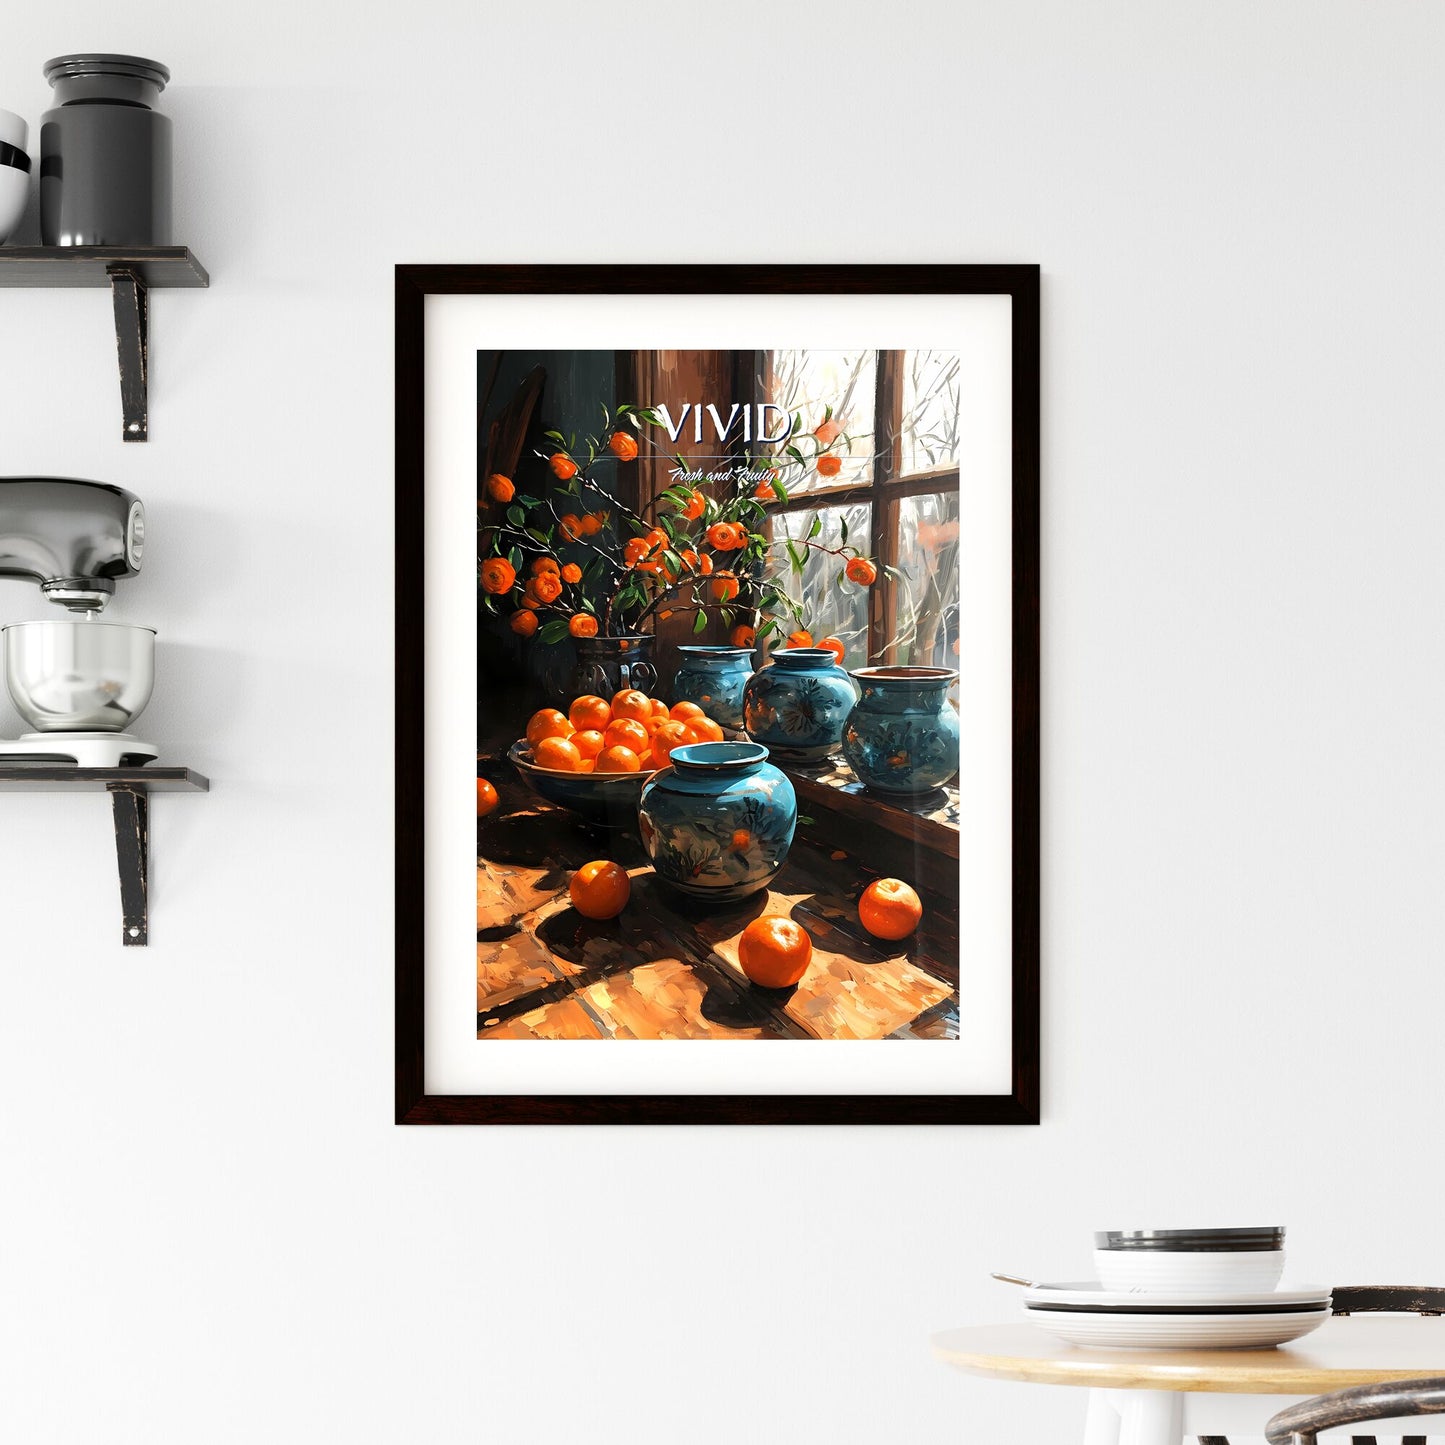 A Poster of impressionistic still life - A Vases And Oranges On A Window Sill Default Title